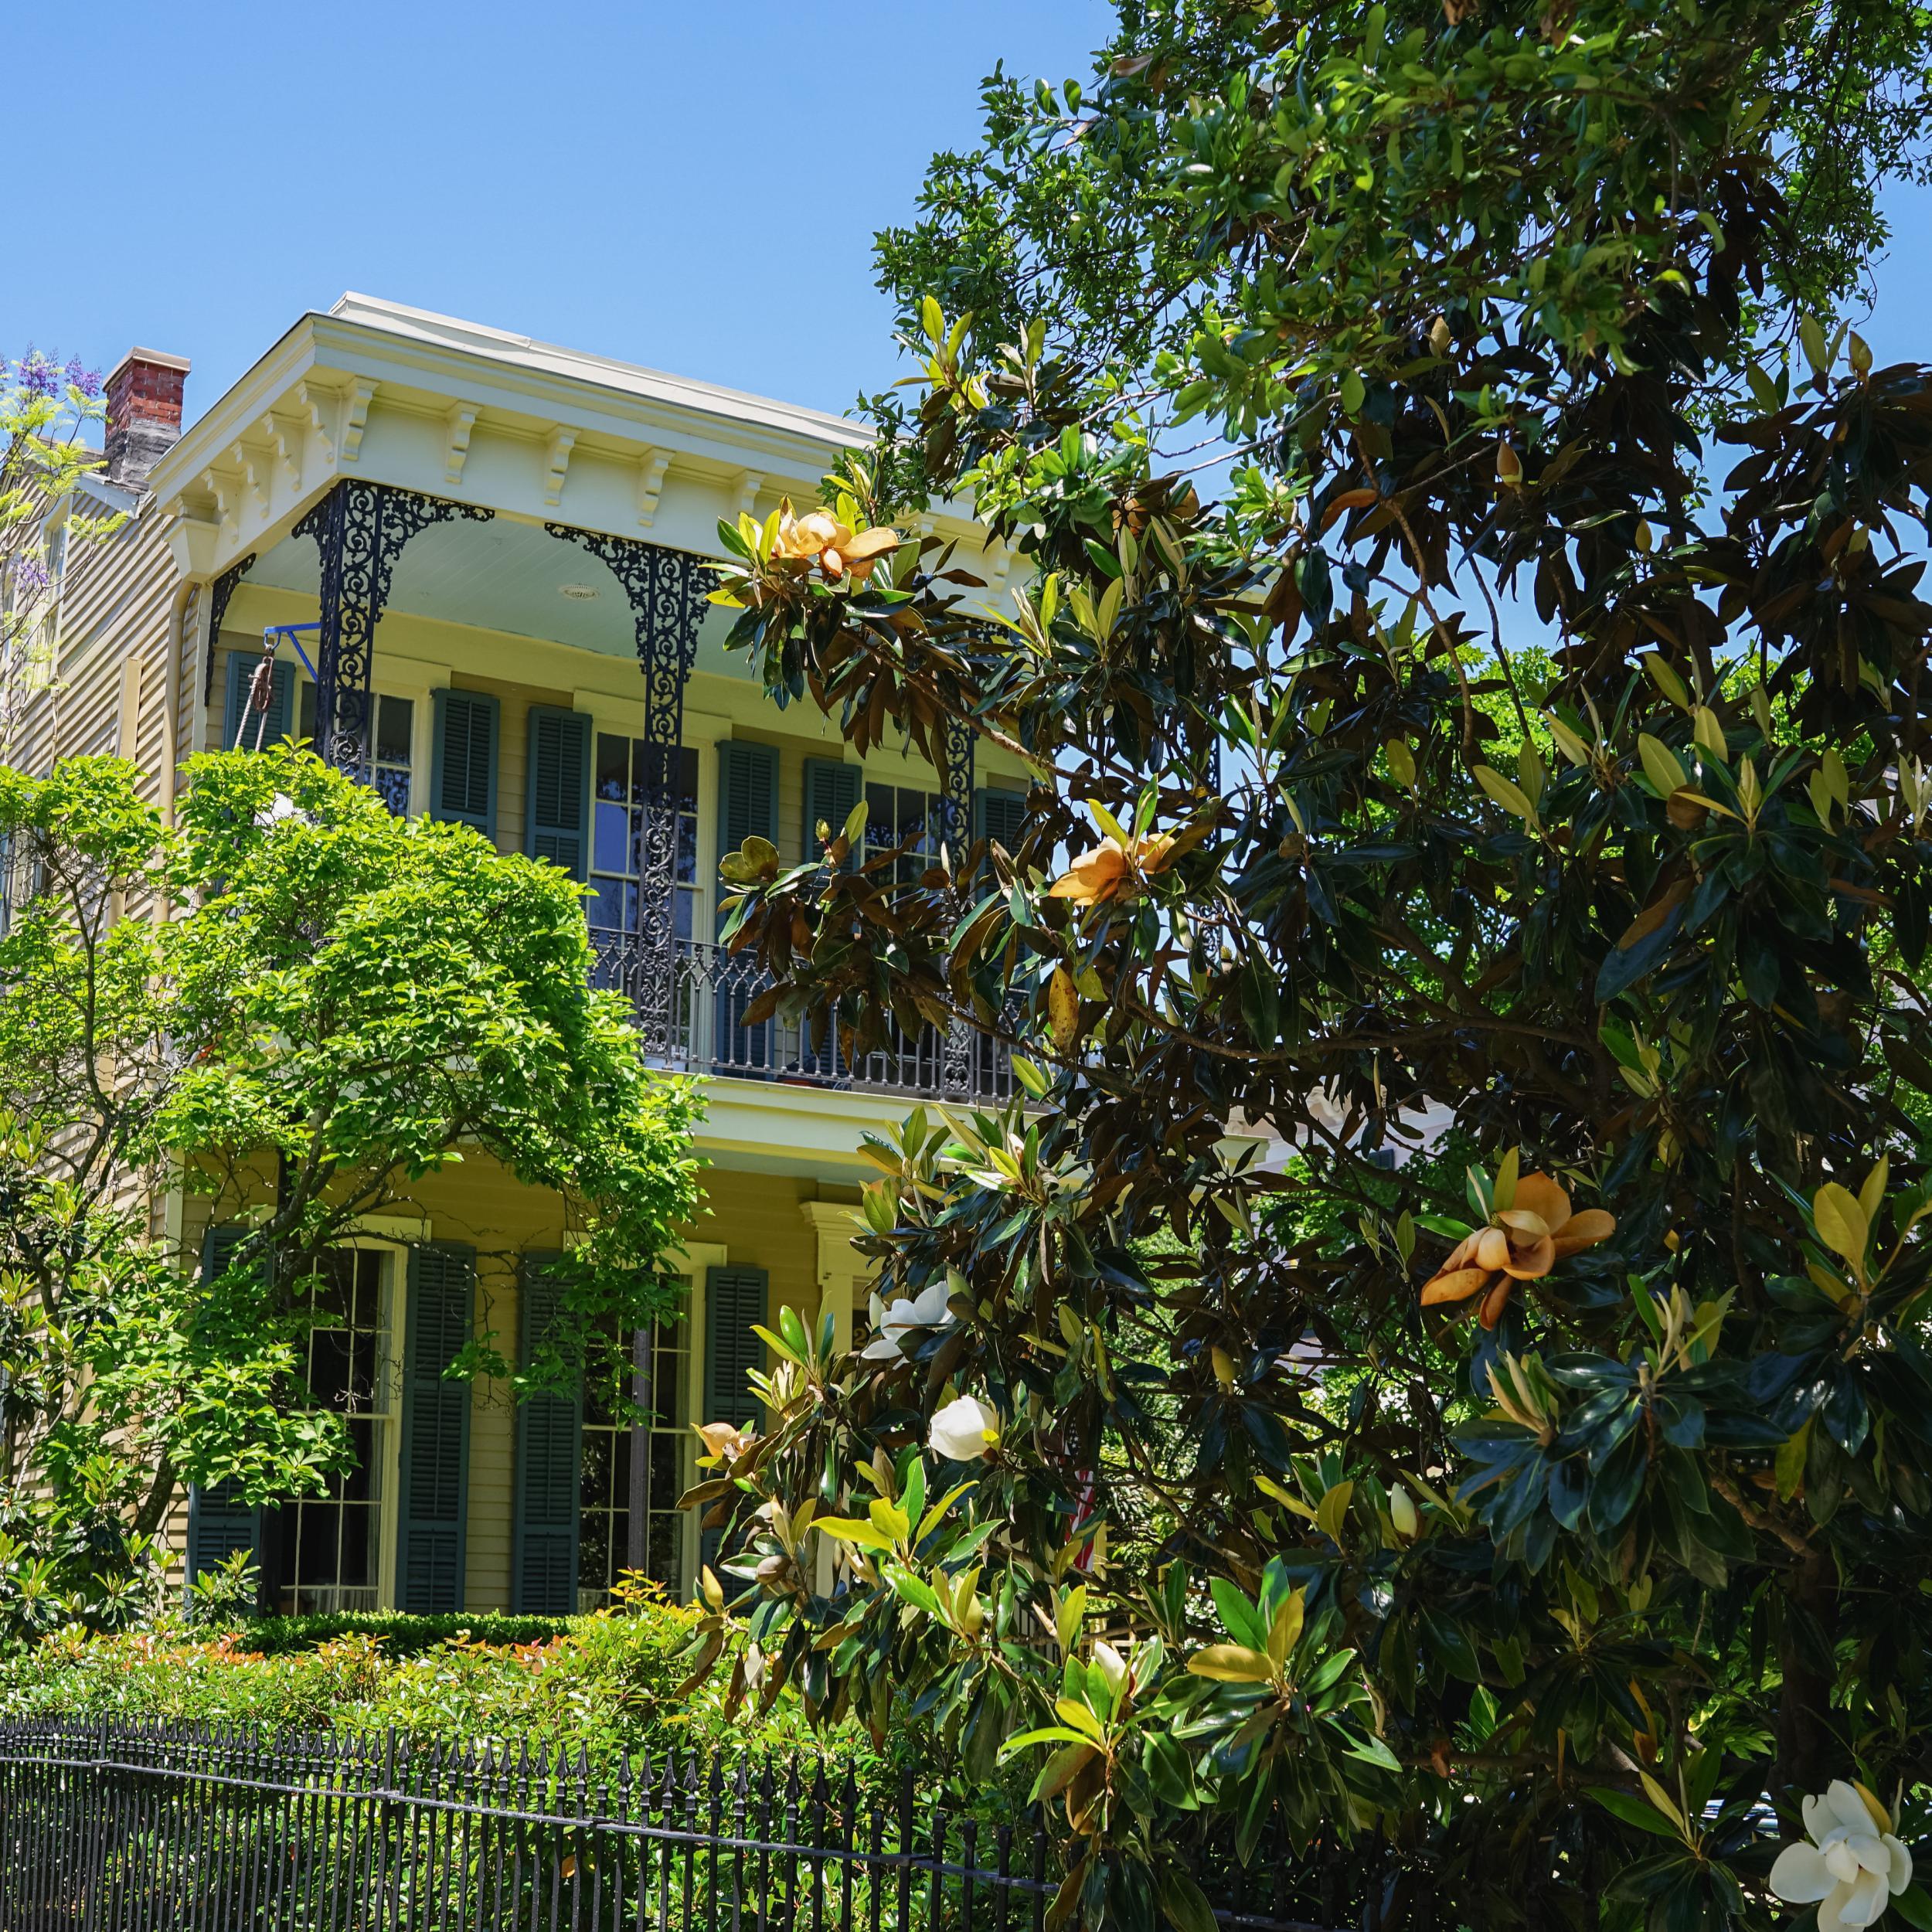 The Garden District's mansions are pure property porn